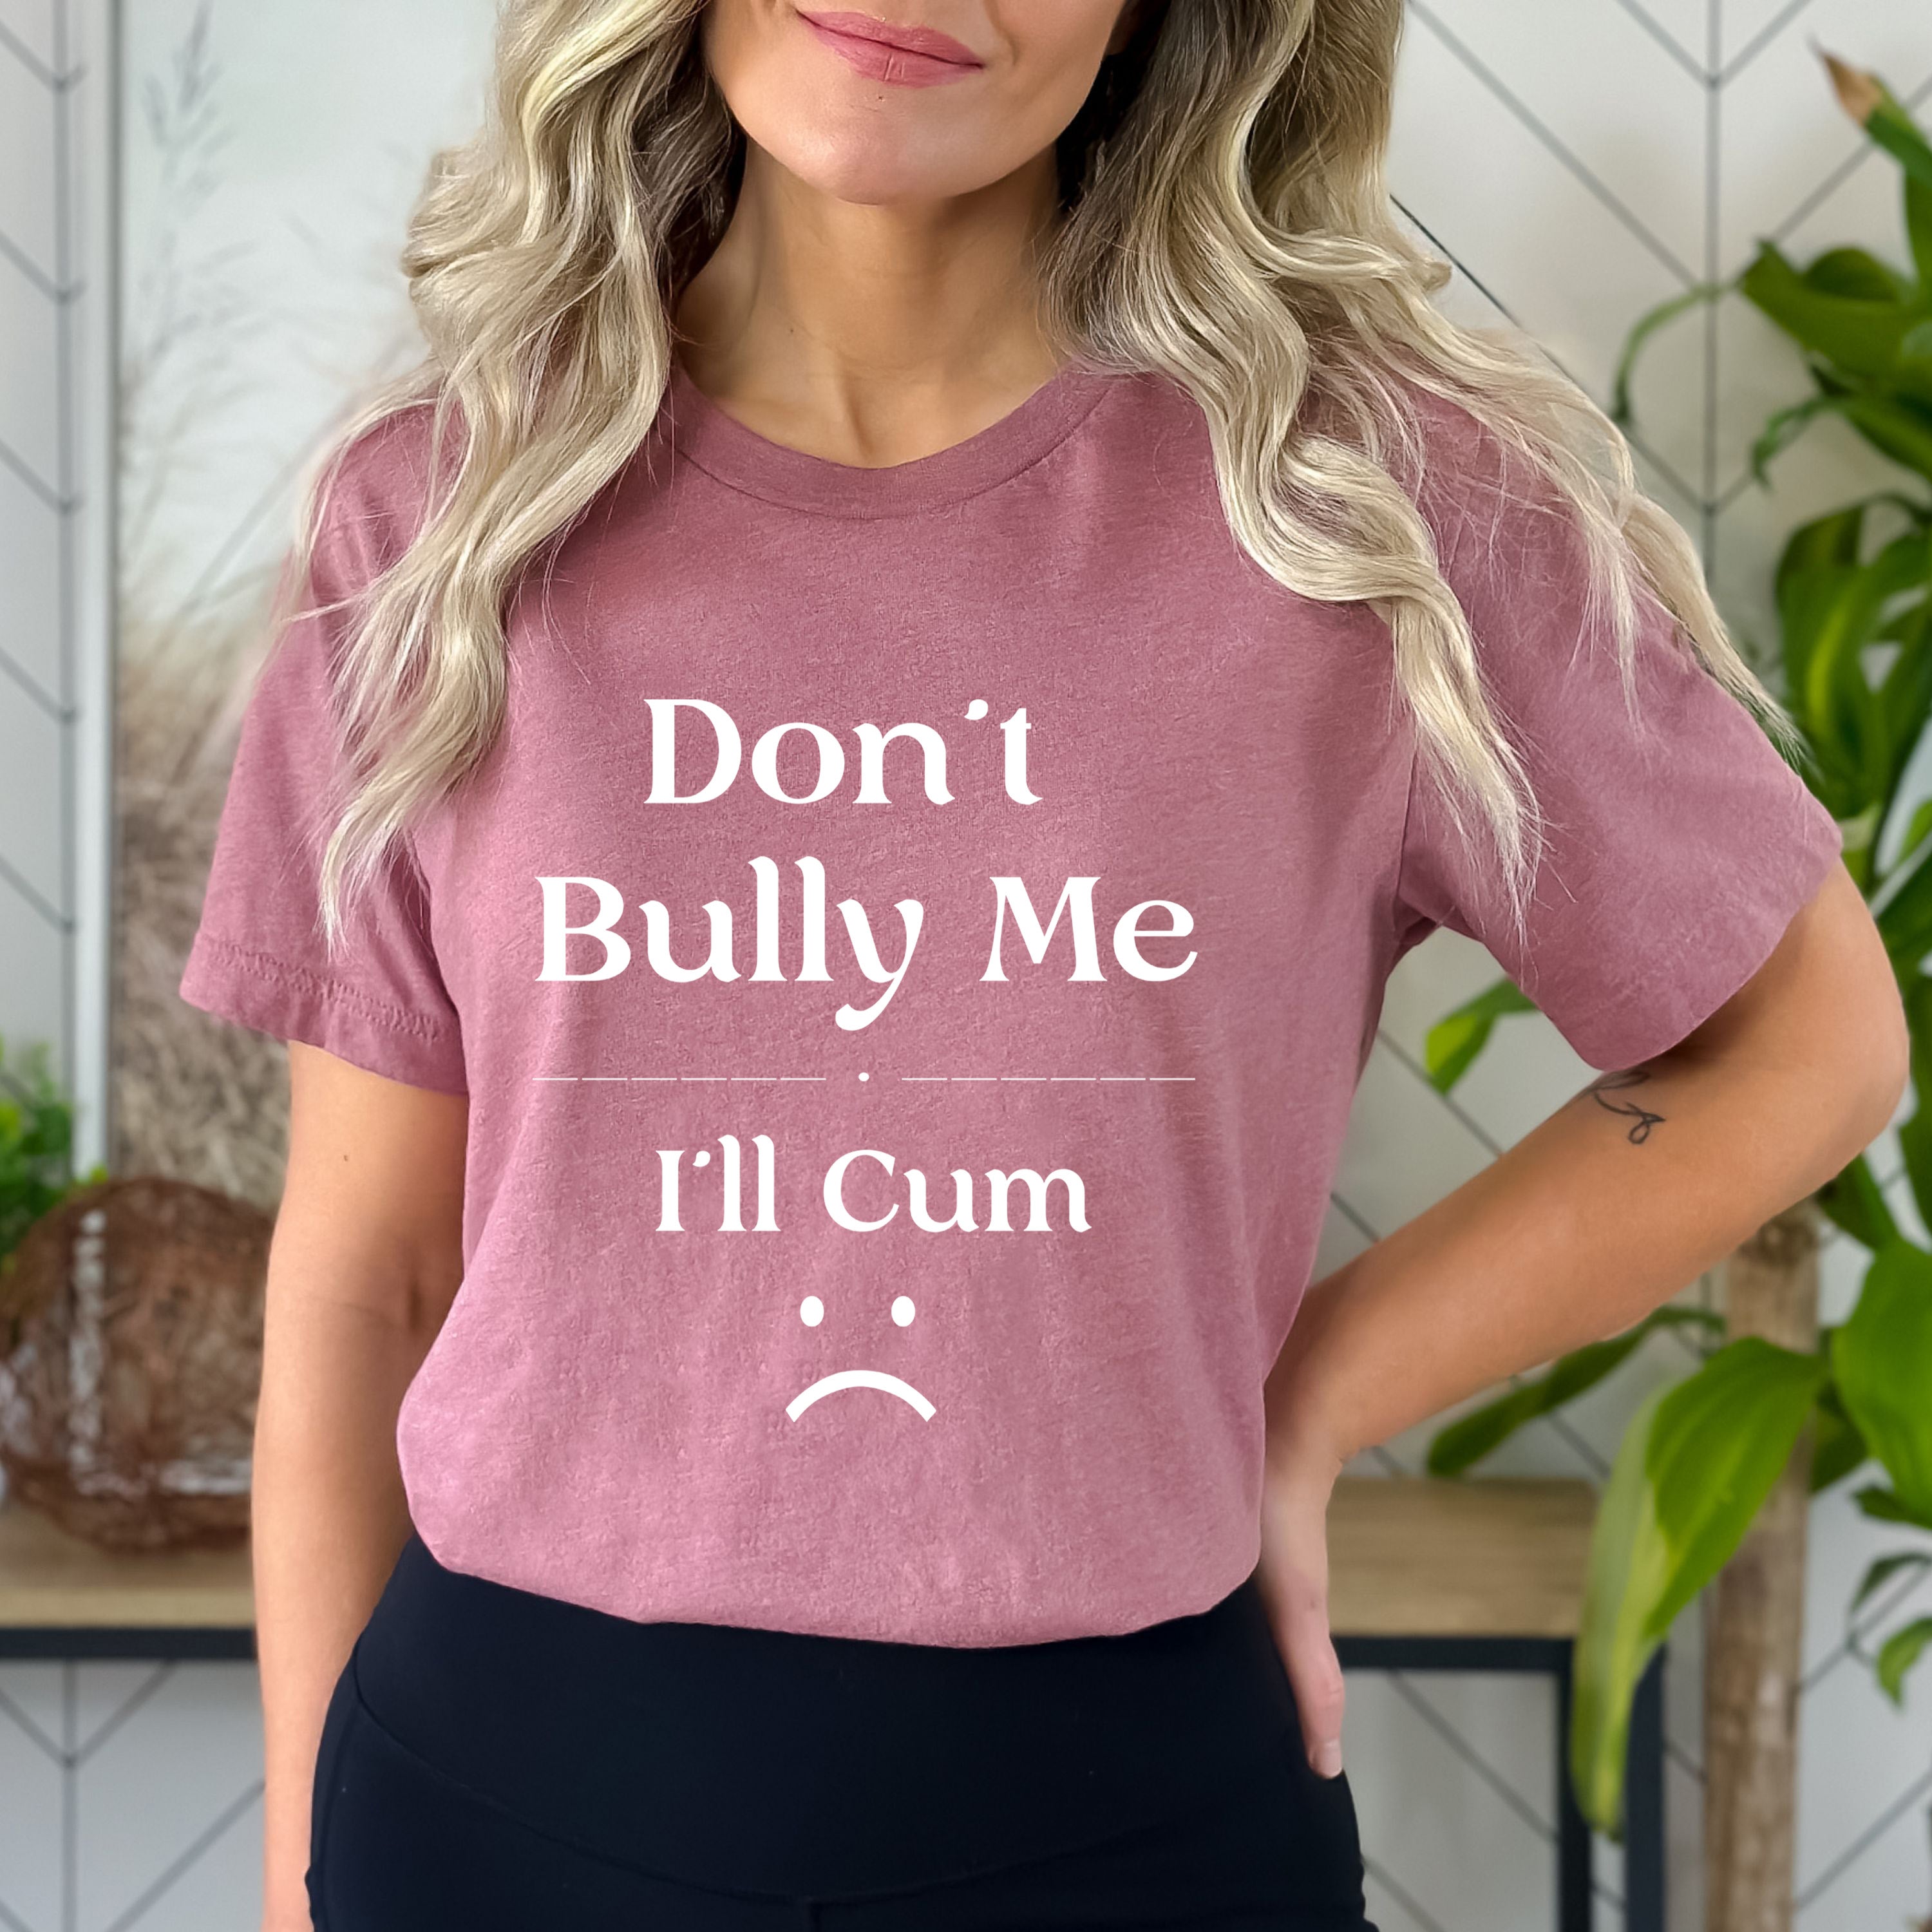 Don't Bully Me - Bella canvas